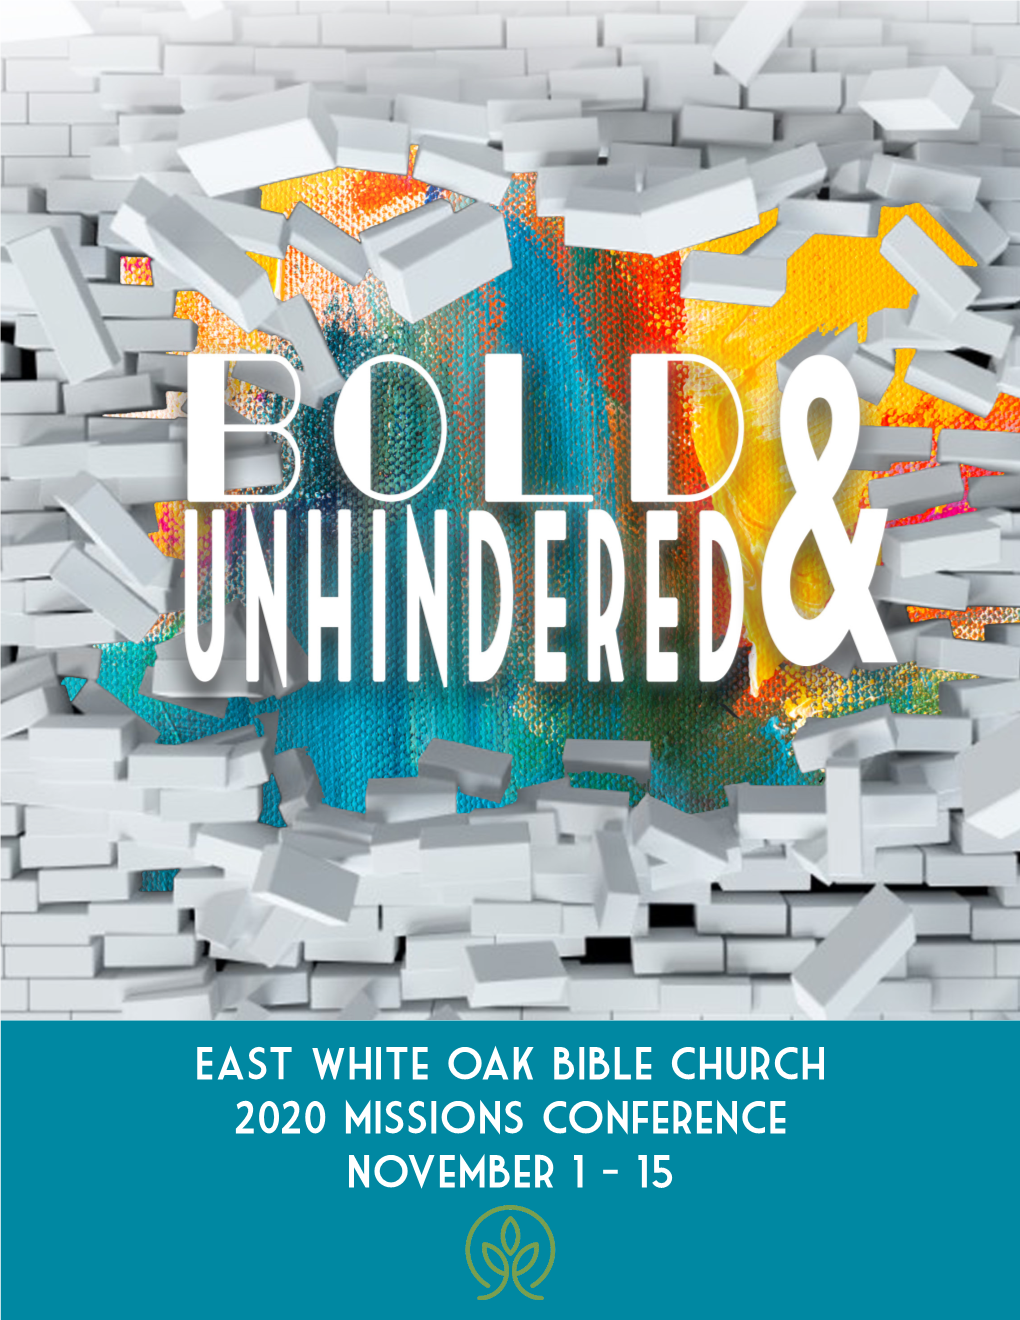 East White Oak Bible Church 2020 Missions Conference November 1 - 15 Welcome